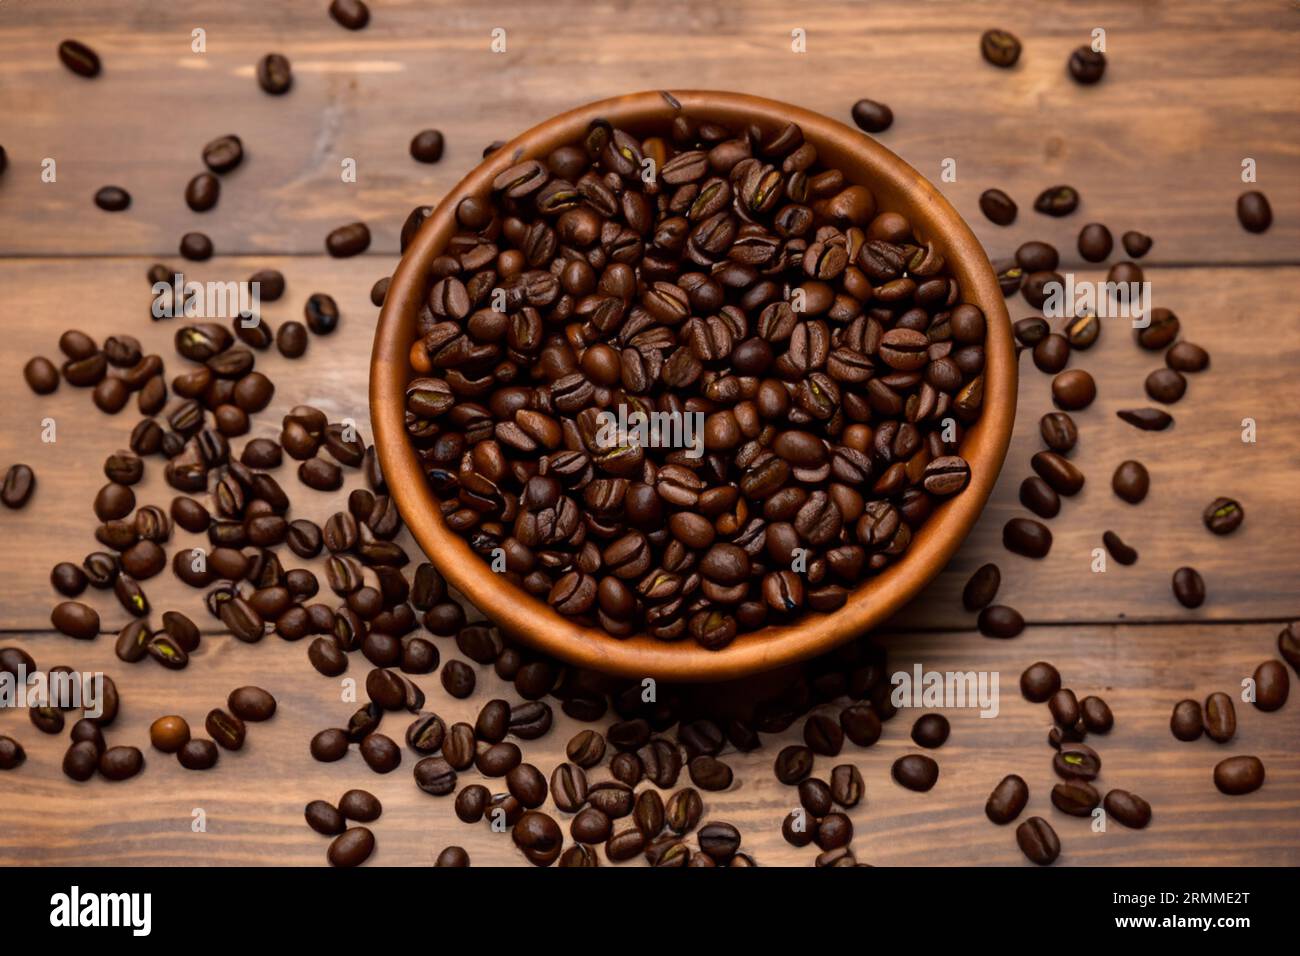 bowl full of organic coffee beans on old wooden table Stock Photo